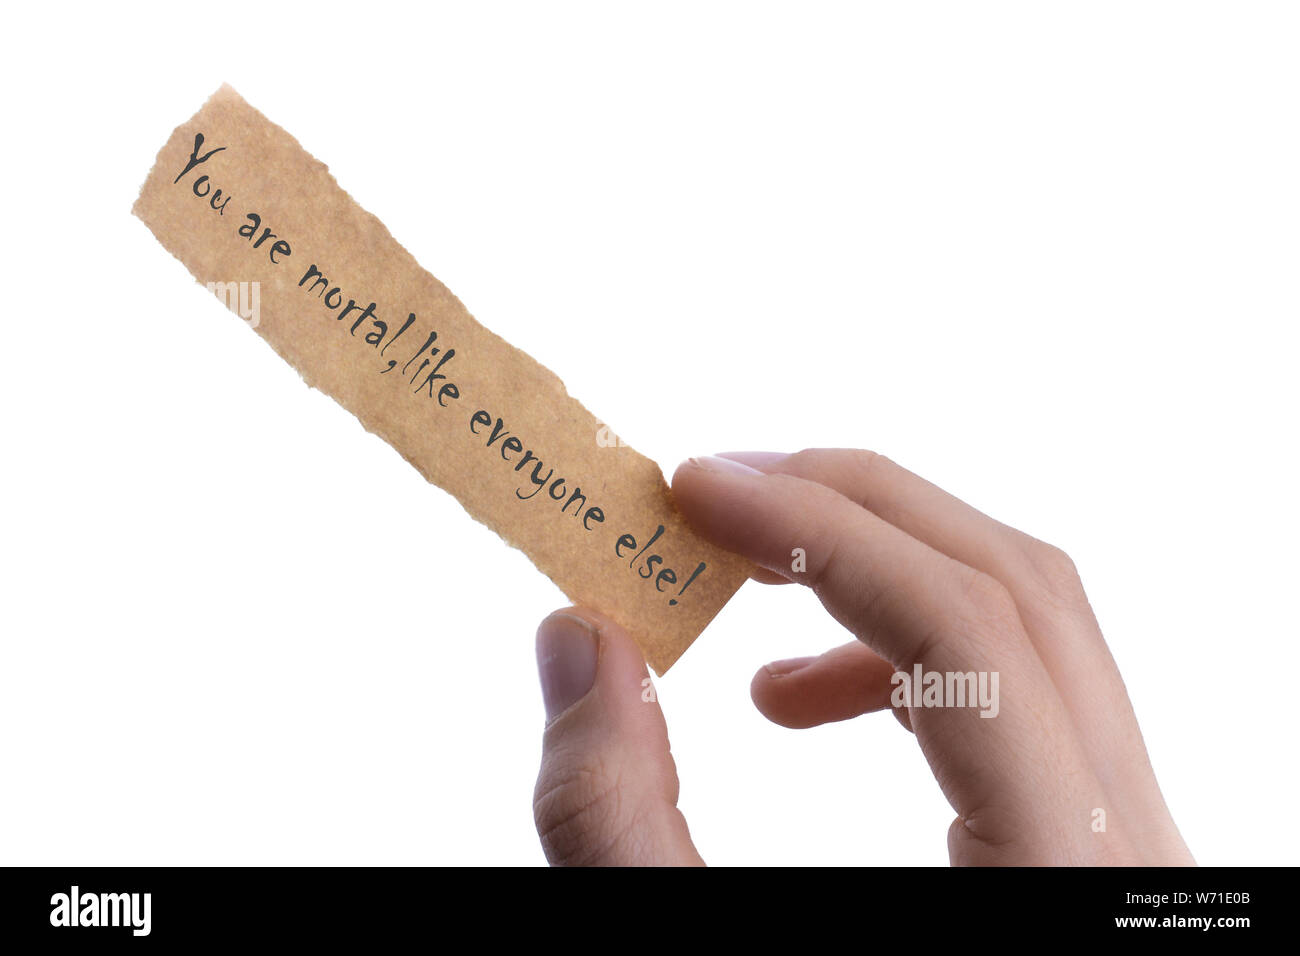 hand holding  piece of blank torn notepaper says YOU ARE MORTAL Stock Photo